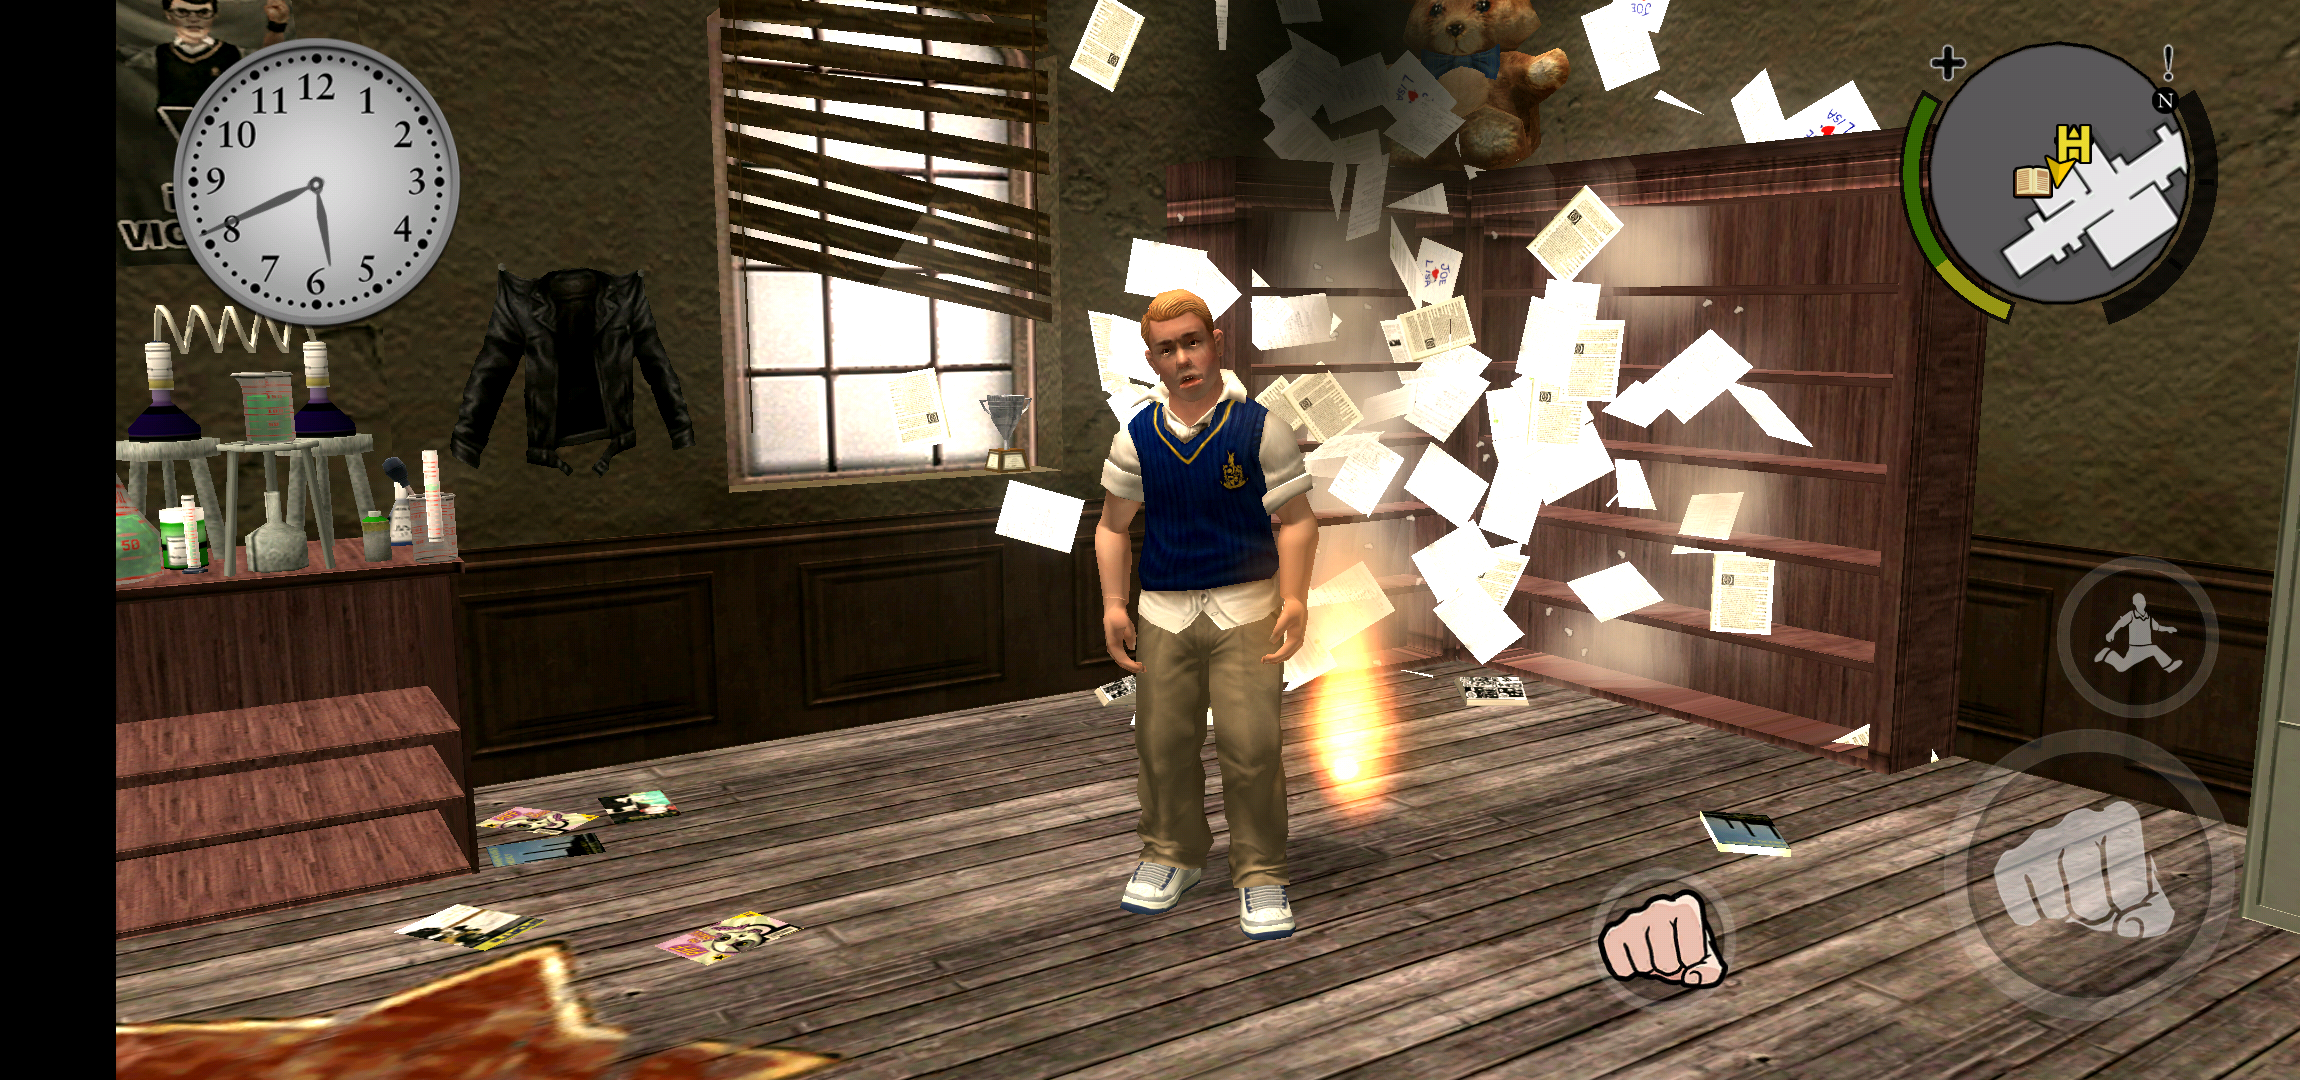 Bully anniversary edition - game screenshot #2 by vini7774 on